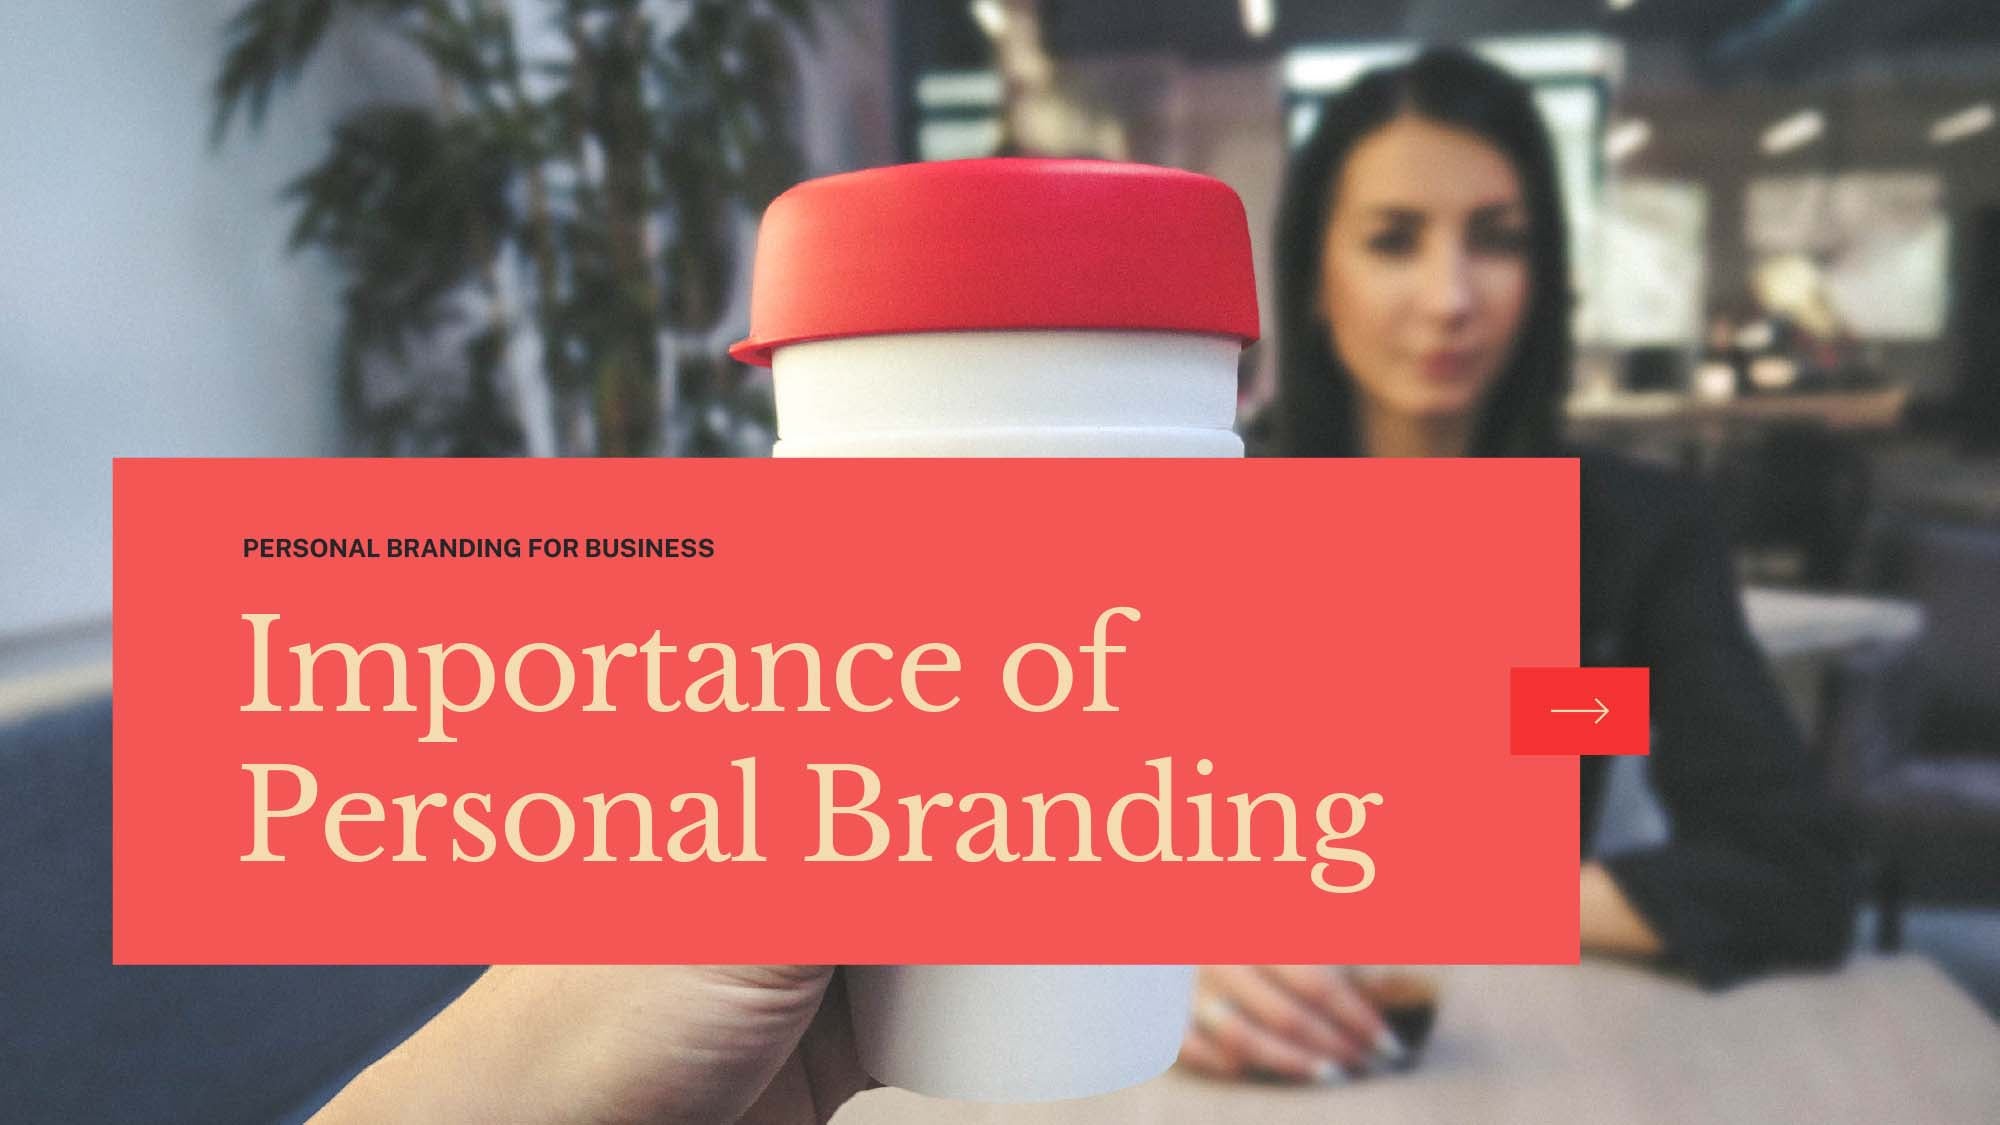 How A Teacher Evaluate The Importance Of Personal Branding for Business